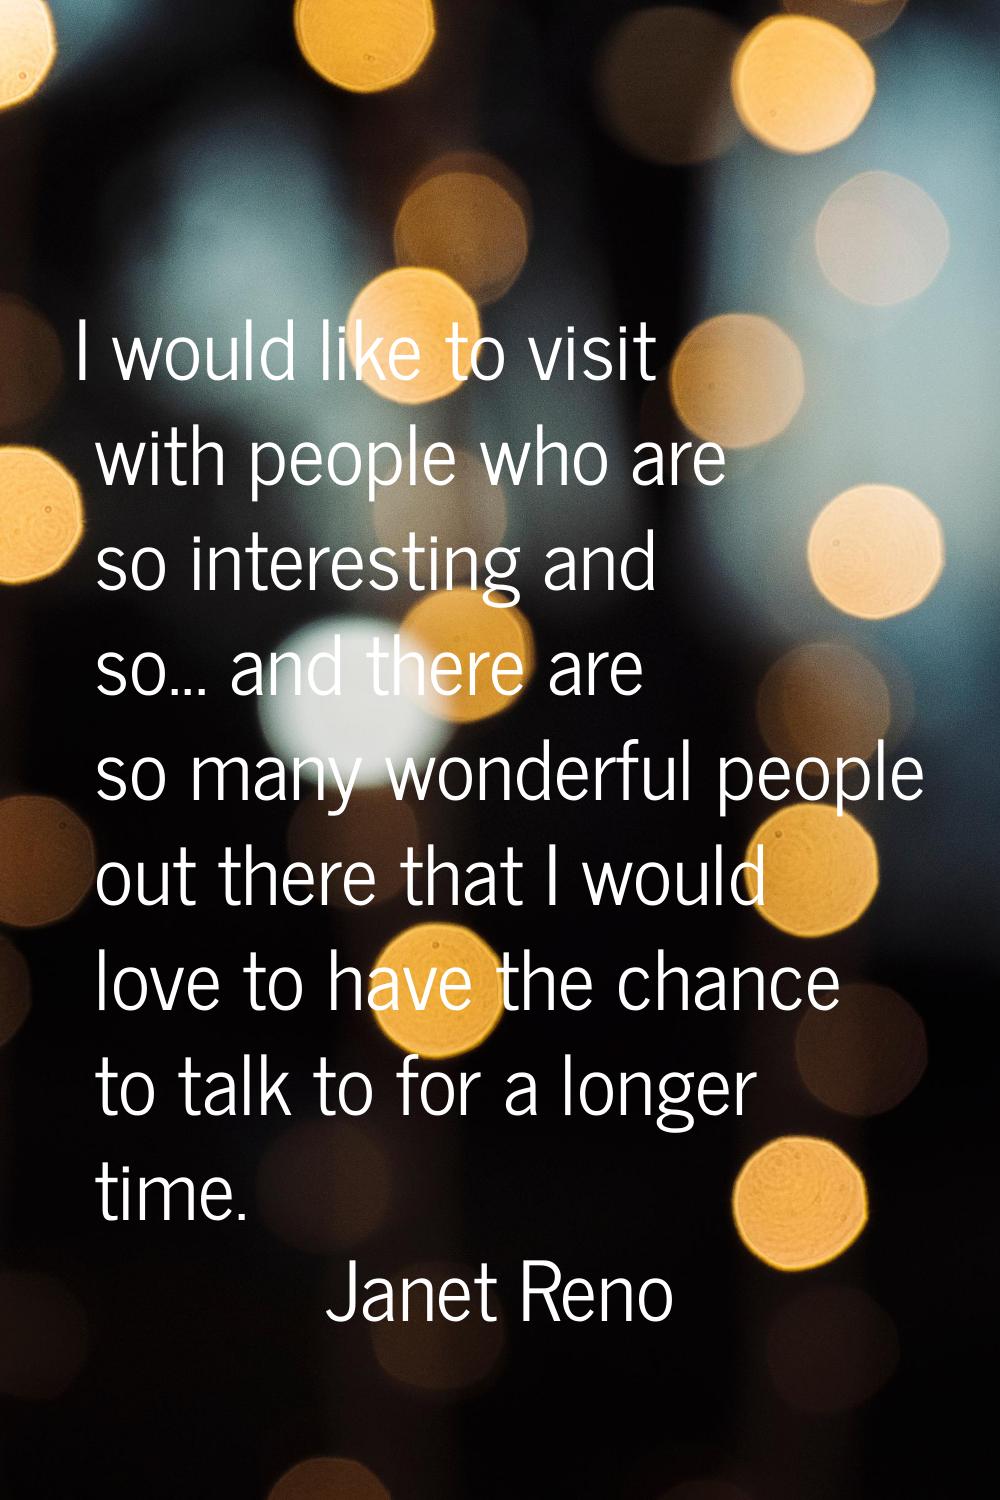 I would like to visit with people who are so interesting and so... and there are so many wonderful 